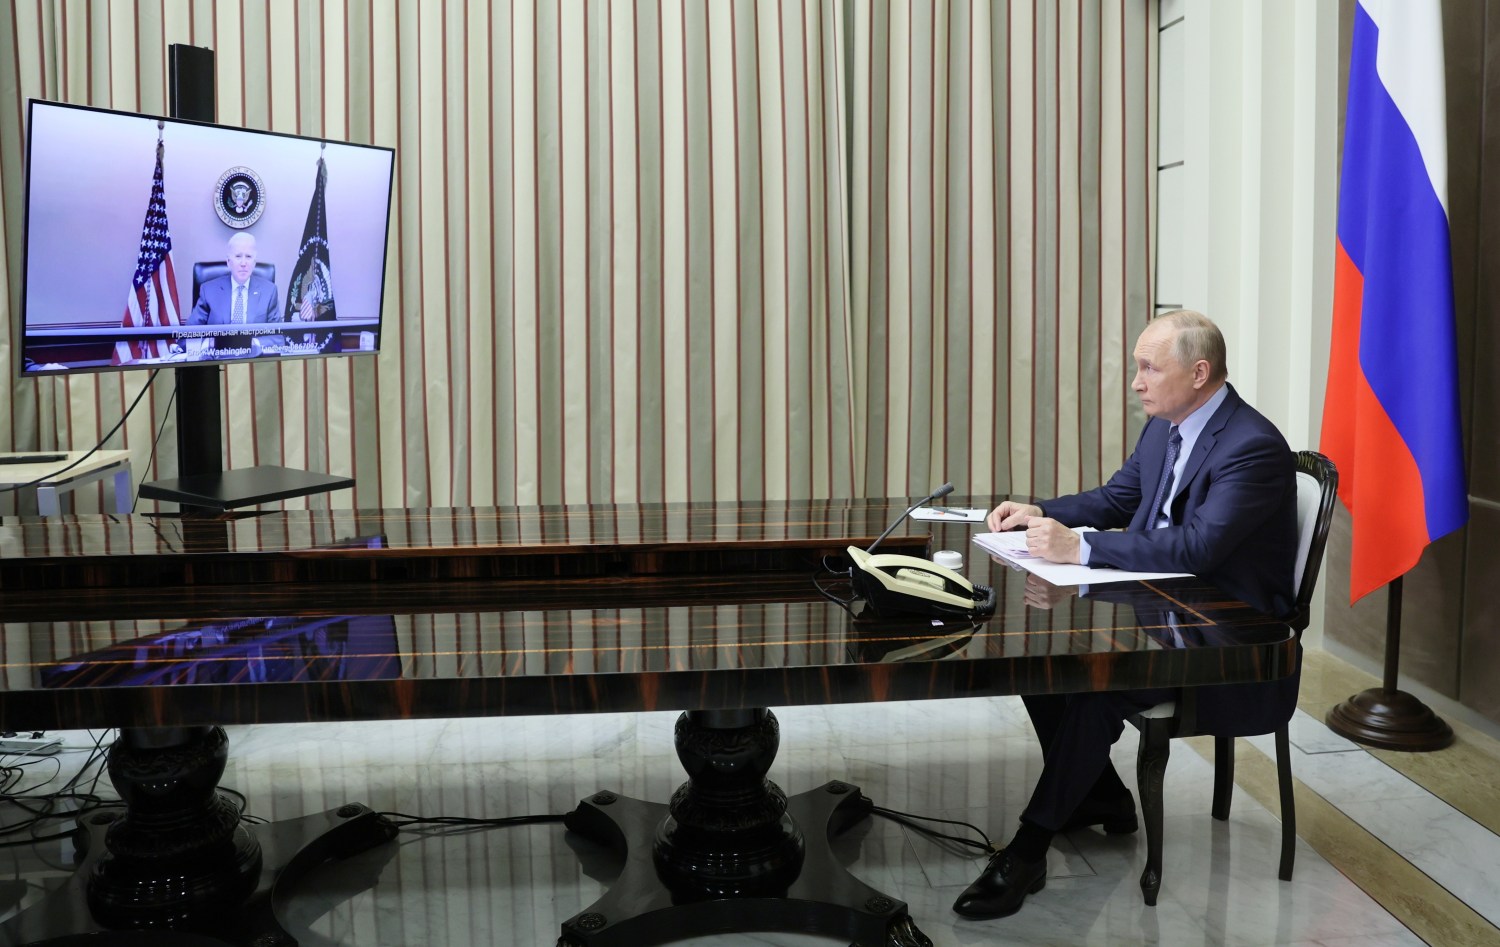 Russian President Vladimir Putin holds talks with U.S. President Joe Biden via a video link in Sochi, Russia December 7, 2021. Sputnik/Mikhail Metzel/Pool via REUTERS ATTENTION EDITORS - THIS IMAGE WAS PROVIDED BY A THIRD PARTY.